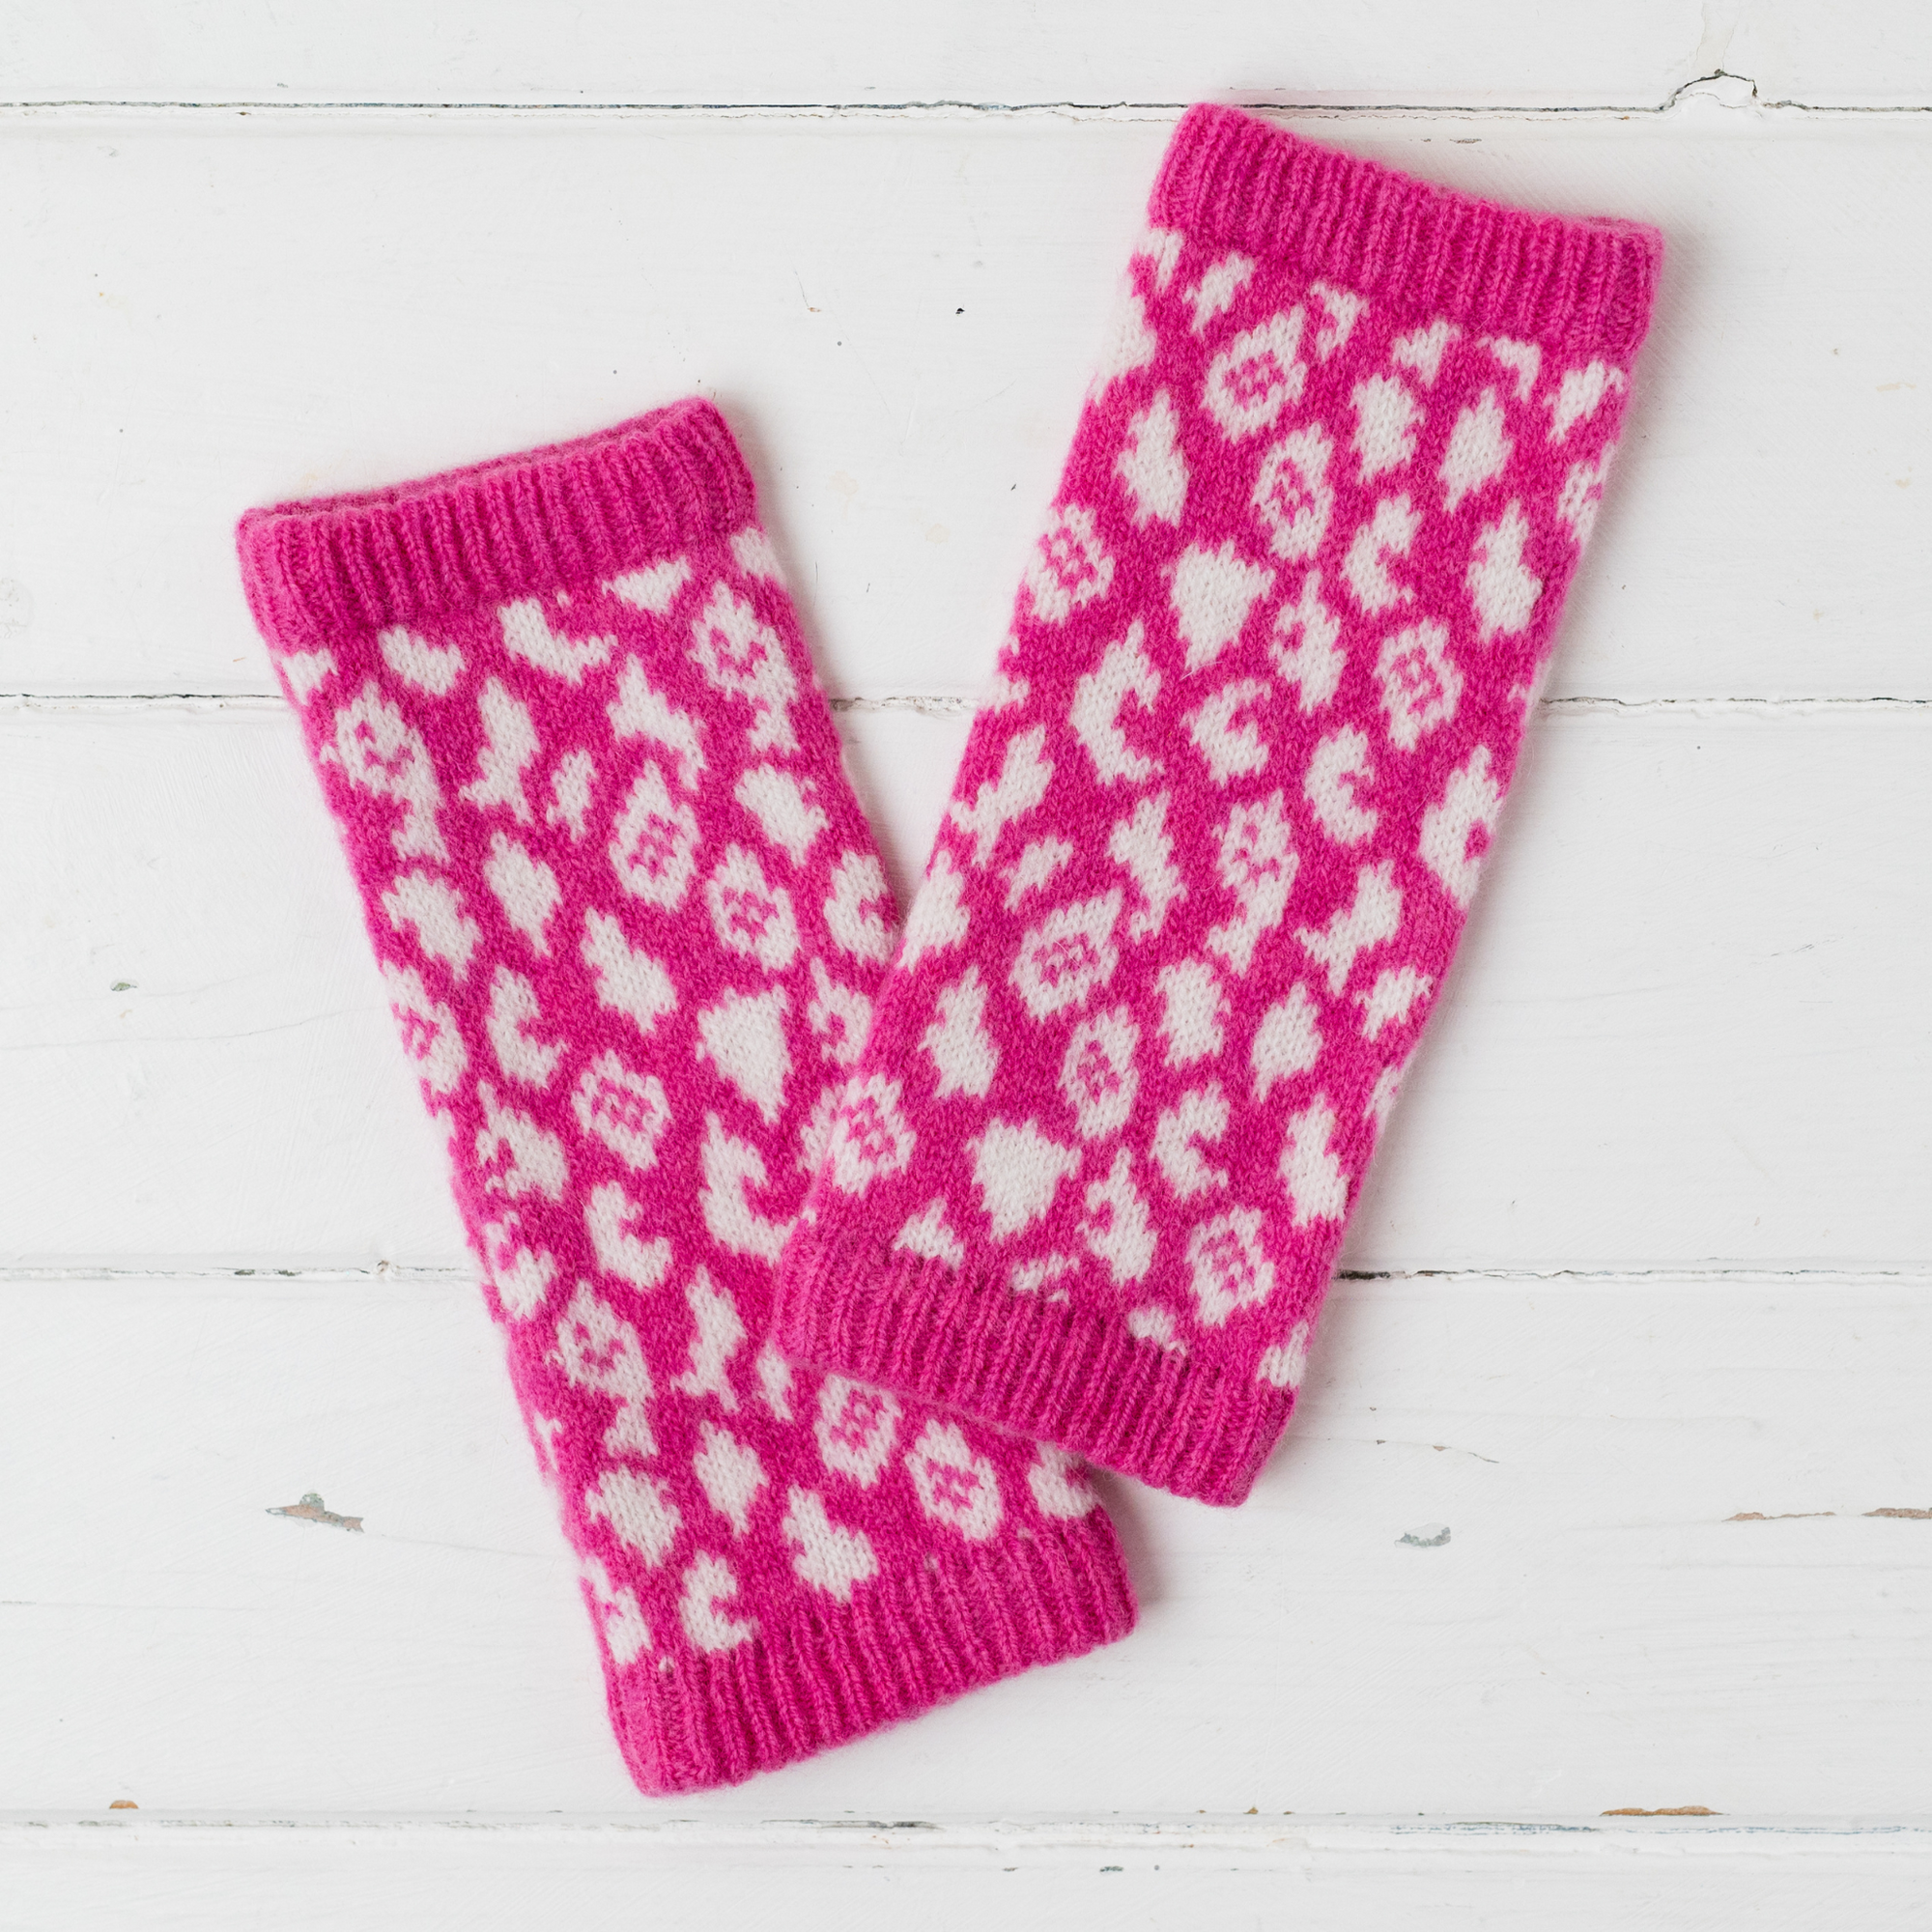 Leopard wrist warmers - bubblegum pink and white (MADE TO ORDER)